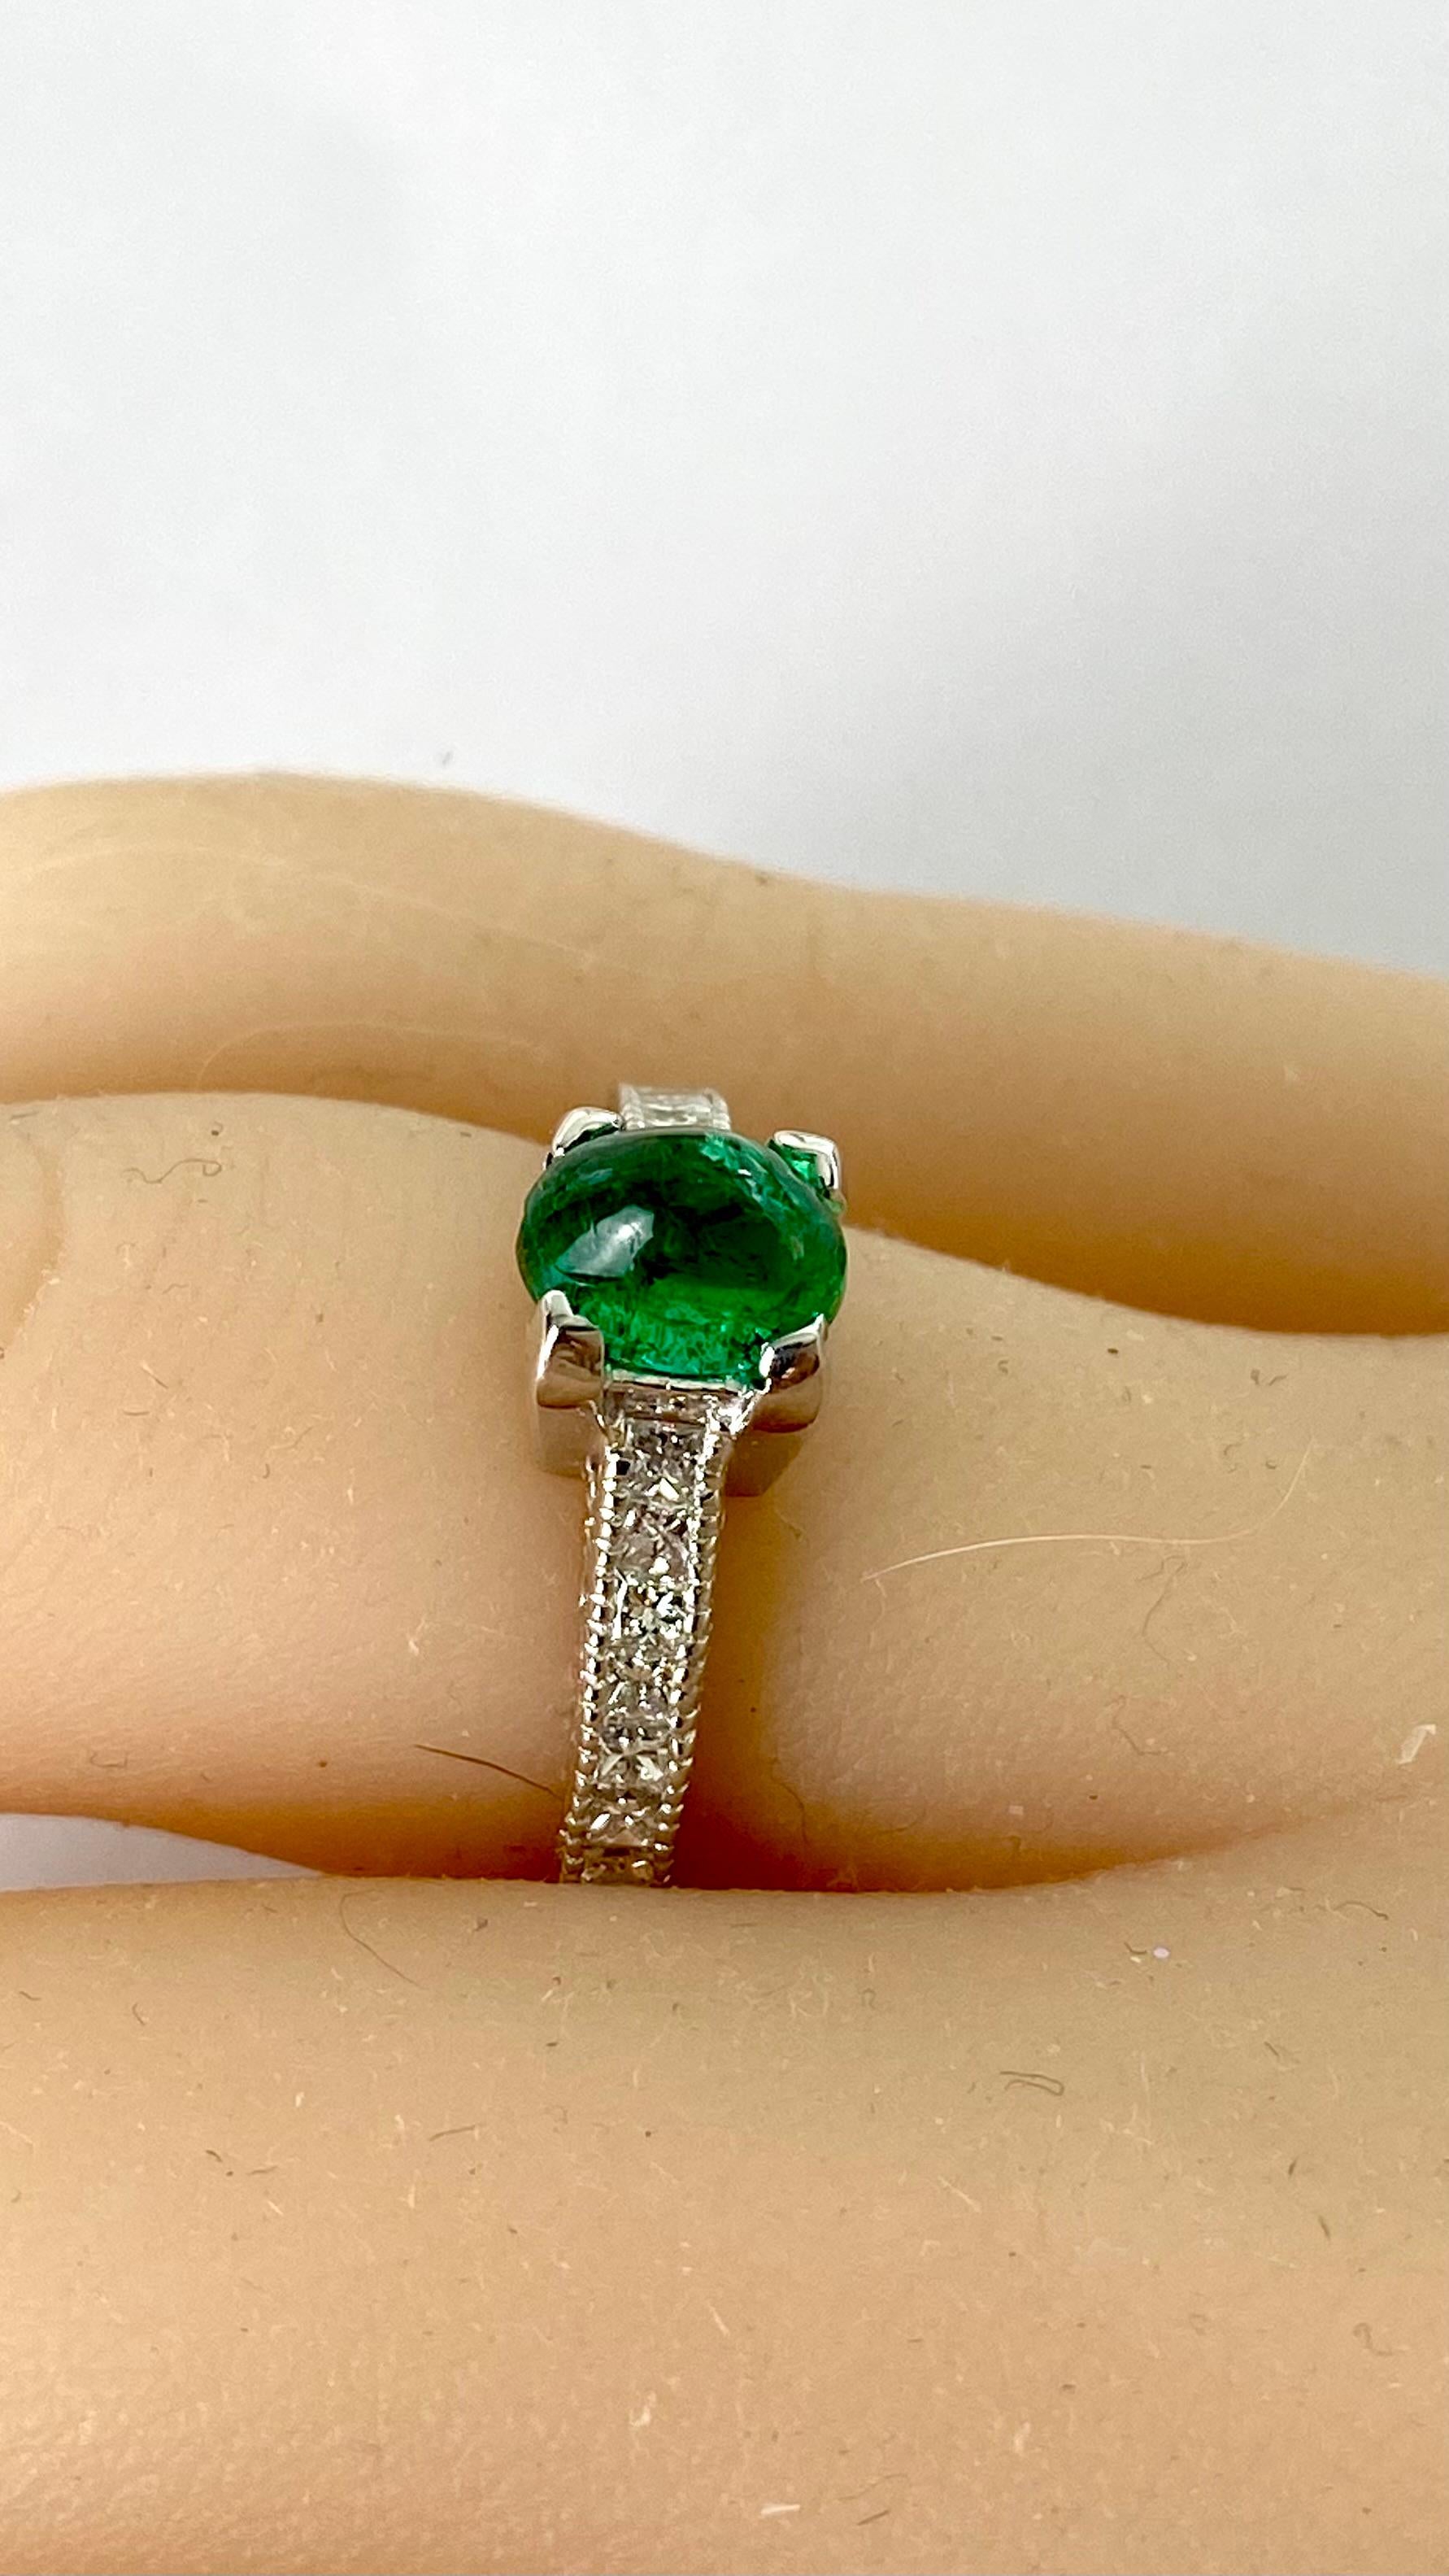 Introducing our exquisite 14 Karat White Gold Oval Cabochon Colombian Emerald Engagement Ring, a masterpiece of fine craftsmanship and timeless elegance.
At the heart of this magnificent ring is a stunning 1.10 carat oval cabochon Colombian Emerald,